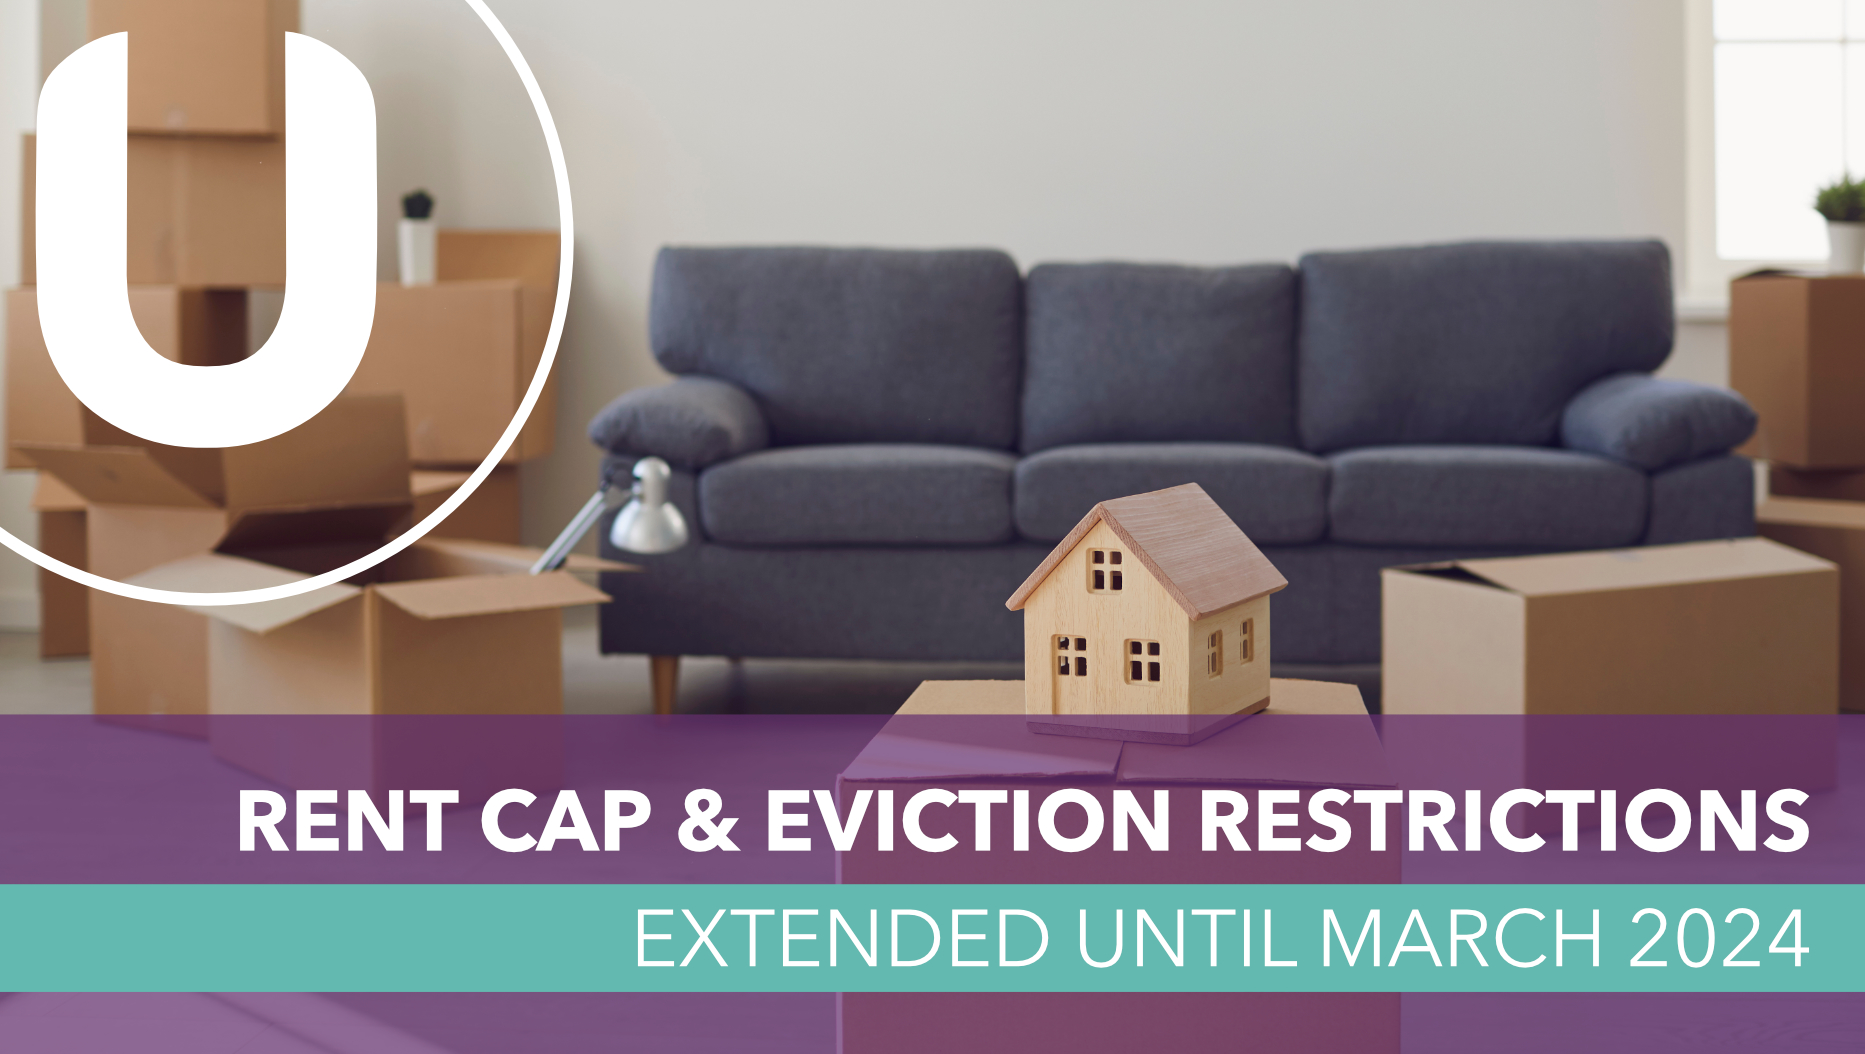 Rent Cap and Eviction Restrictions extended until March 2024